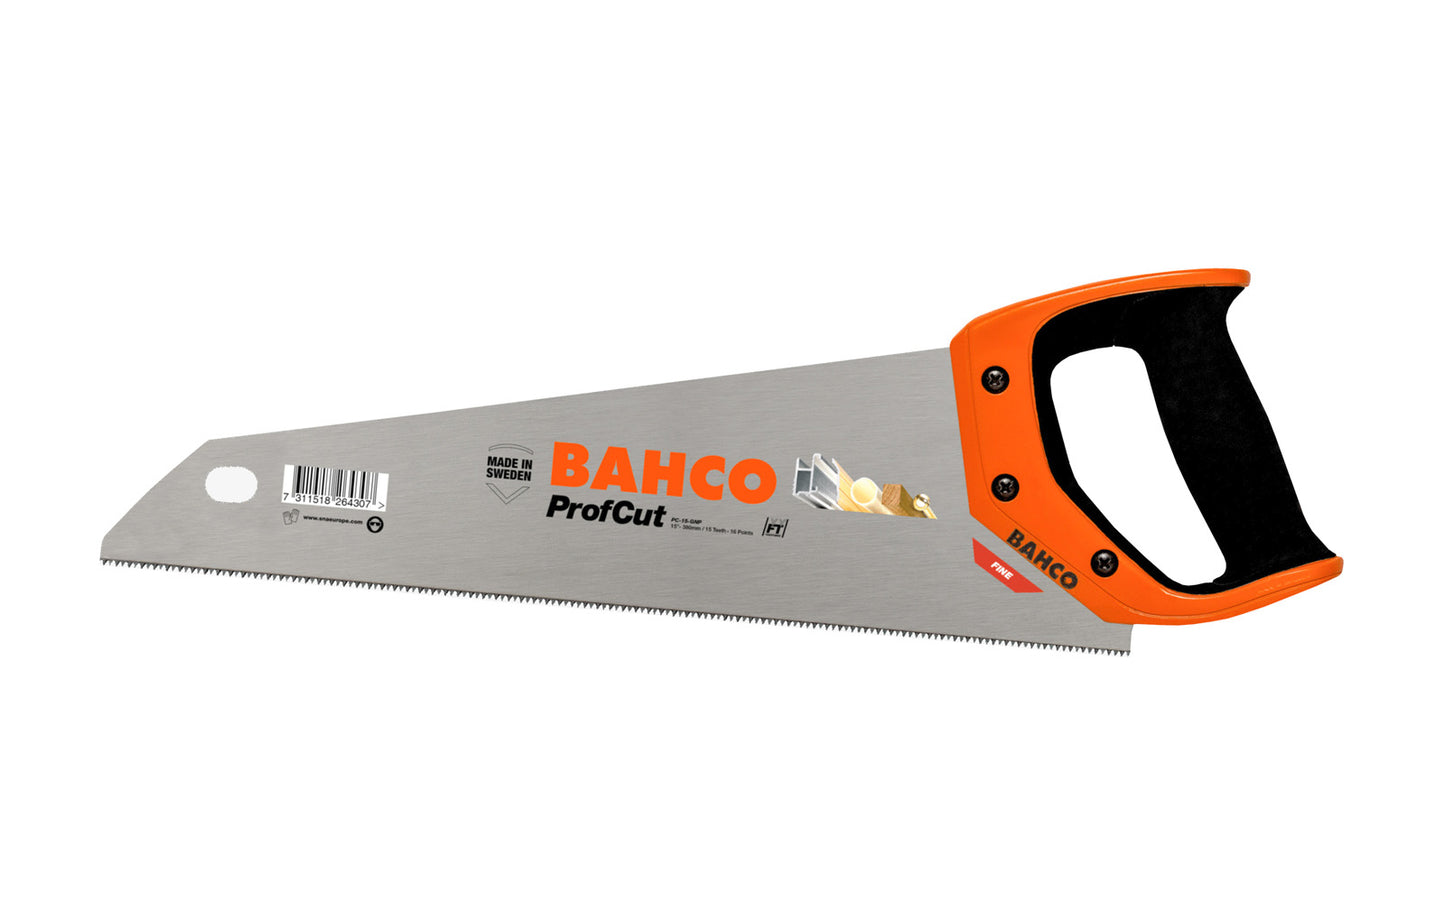 The Bahco "ProfCut" 15" General Purpose Toolbox Handsaw 15 TPI is a good saw for cutting plastics, laminates, wood & soft metals like aluminum. Hardpoint teeth for long-lasting sharpness. Thicker blade for high-precision & straight cutting with good stability & comfort. Toolbox sized for easy storage.  Model PC-15-GNP ~ 7311518264307 Made in Sweden